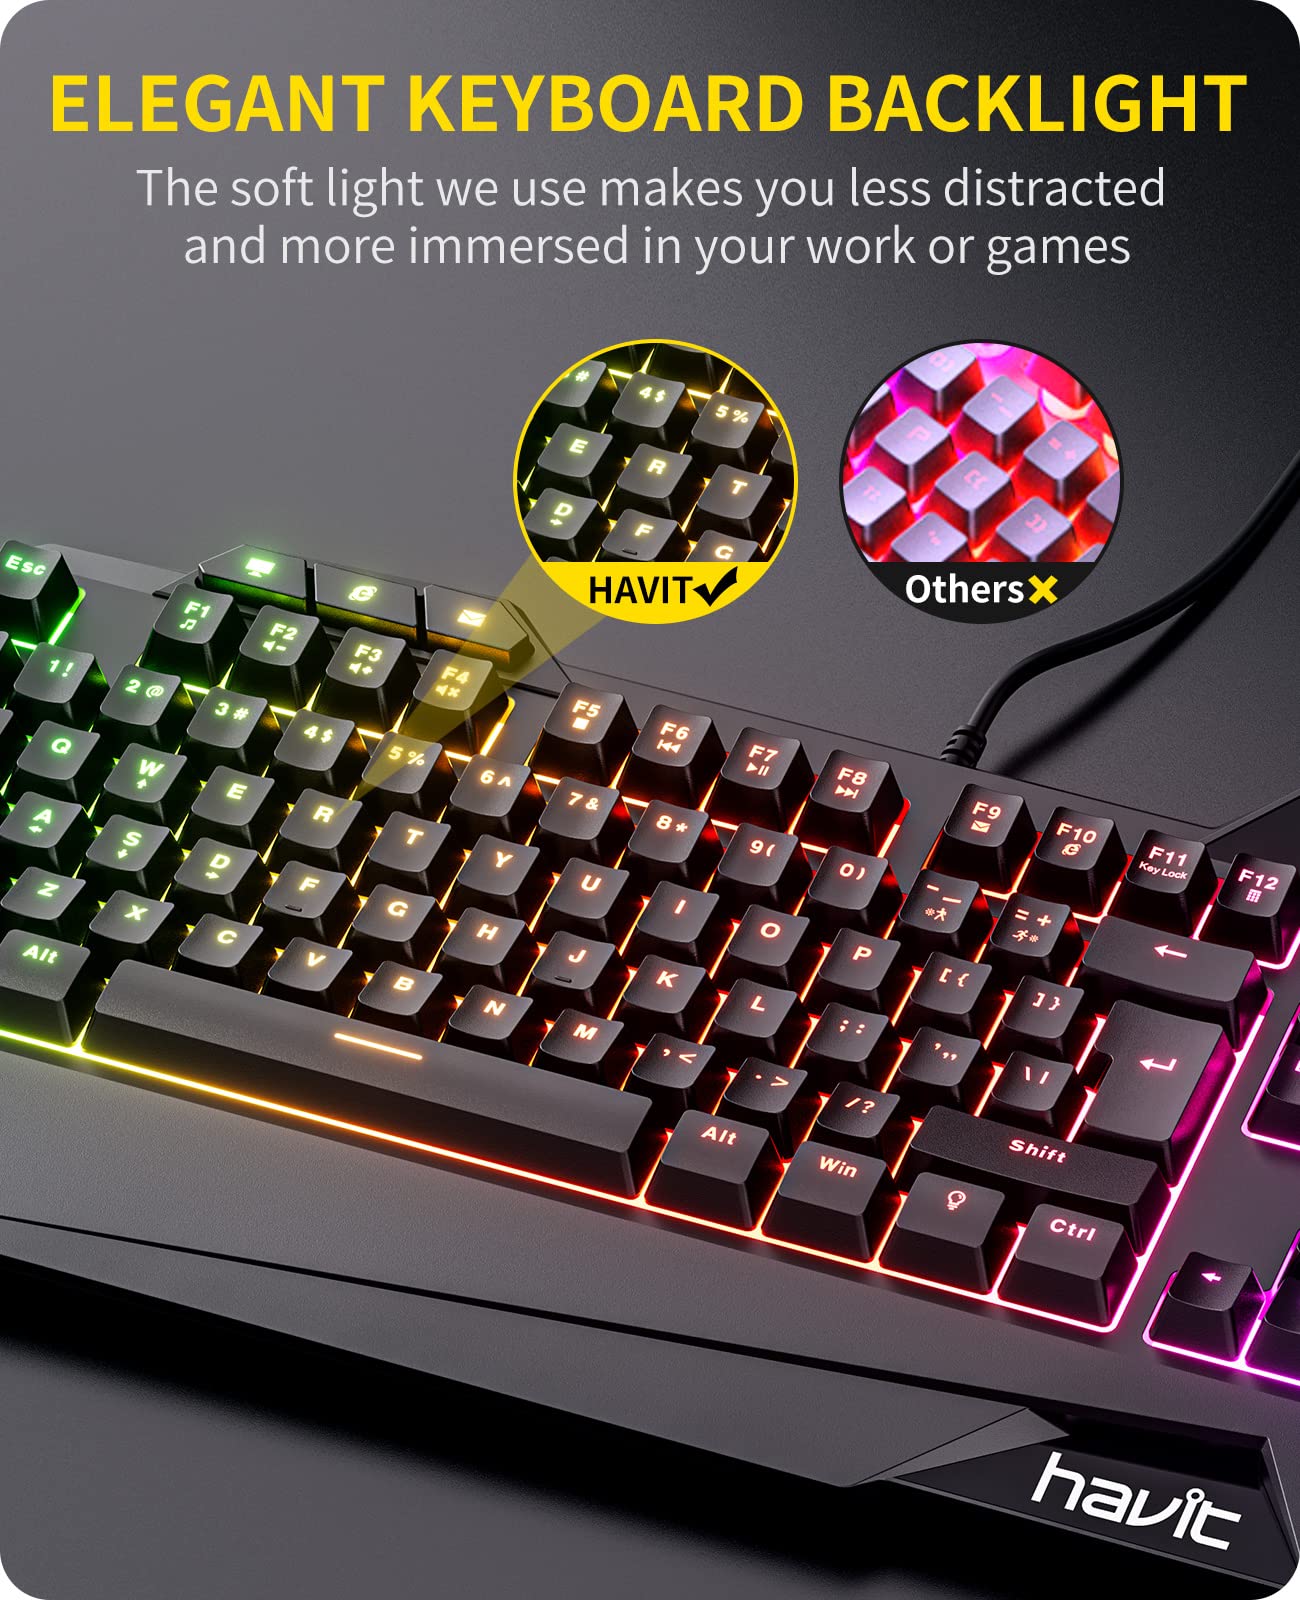 havit Gaming Keyboard and Mouse Combo, Backlit Computer keyboards and RGB Gaming Mouse, Gaming Accessories 104 Keys PC Gaming Keyboard with DPI 4800 Mouse for Gamer, Black